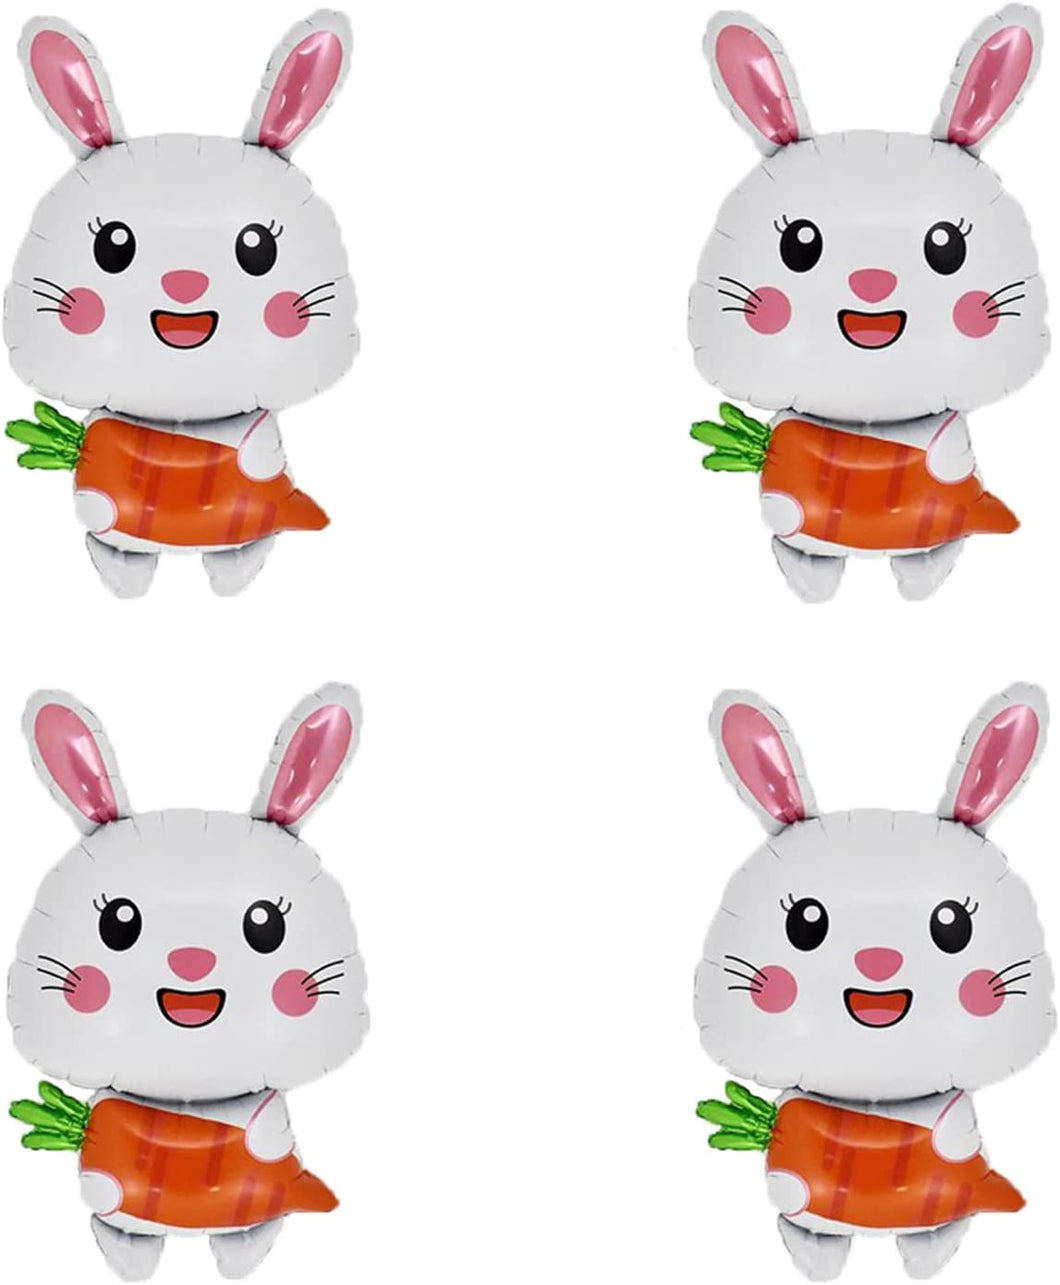 4 pcs Easter Party Decorations White Bunny Shaped Balloons Aluminum Foil Rabbit Balloons Easter Party Favors Animal Foil Balloons Mylar Balloons Decors for Birthday Party Baby Shower (white)